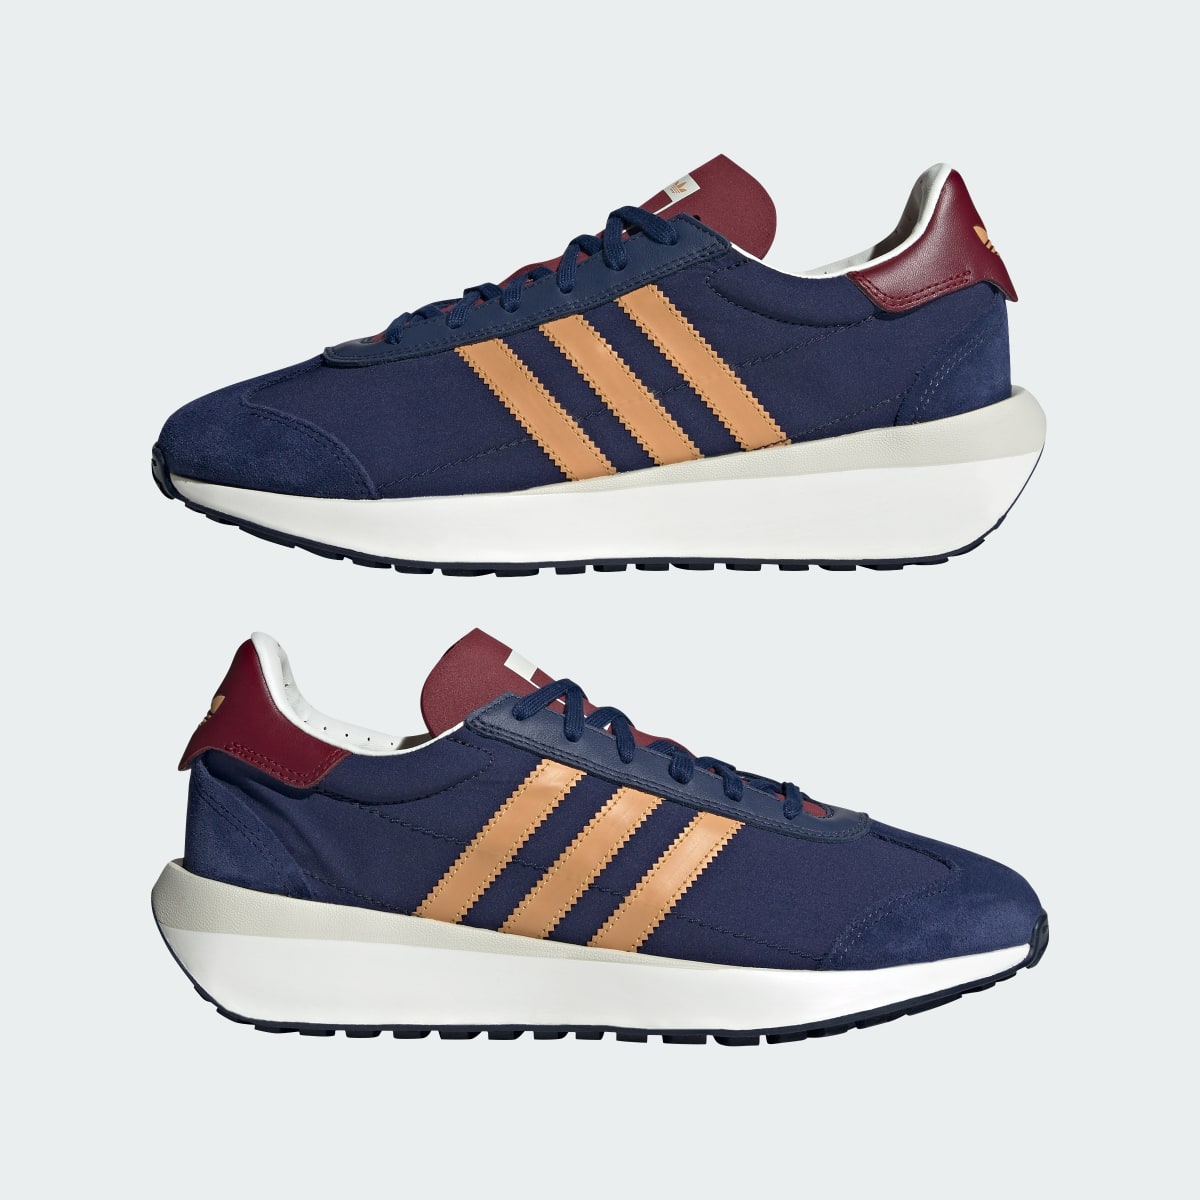 Adidas Country XLG Shoes. 11